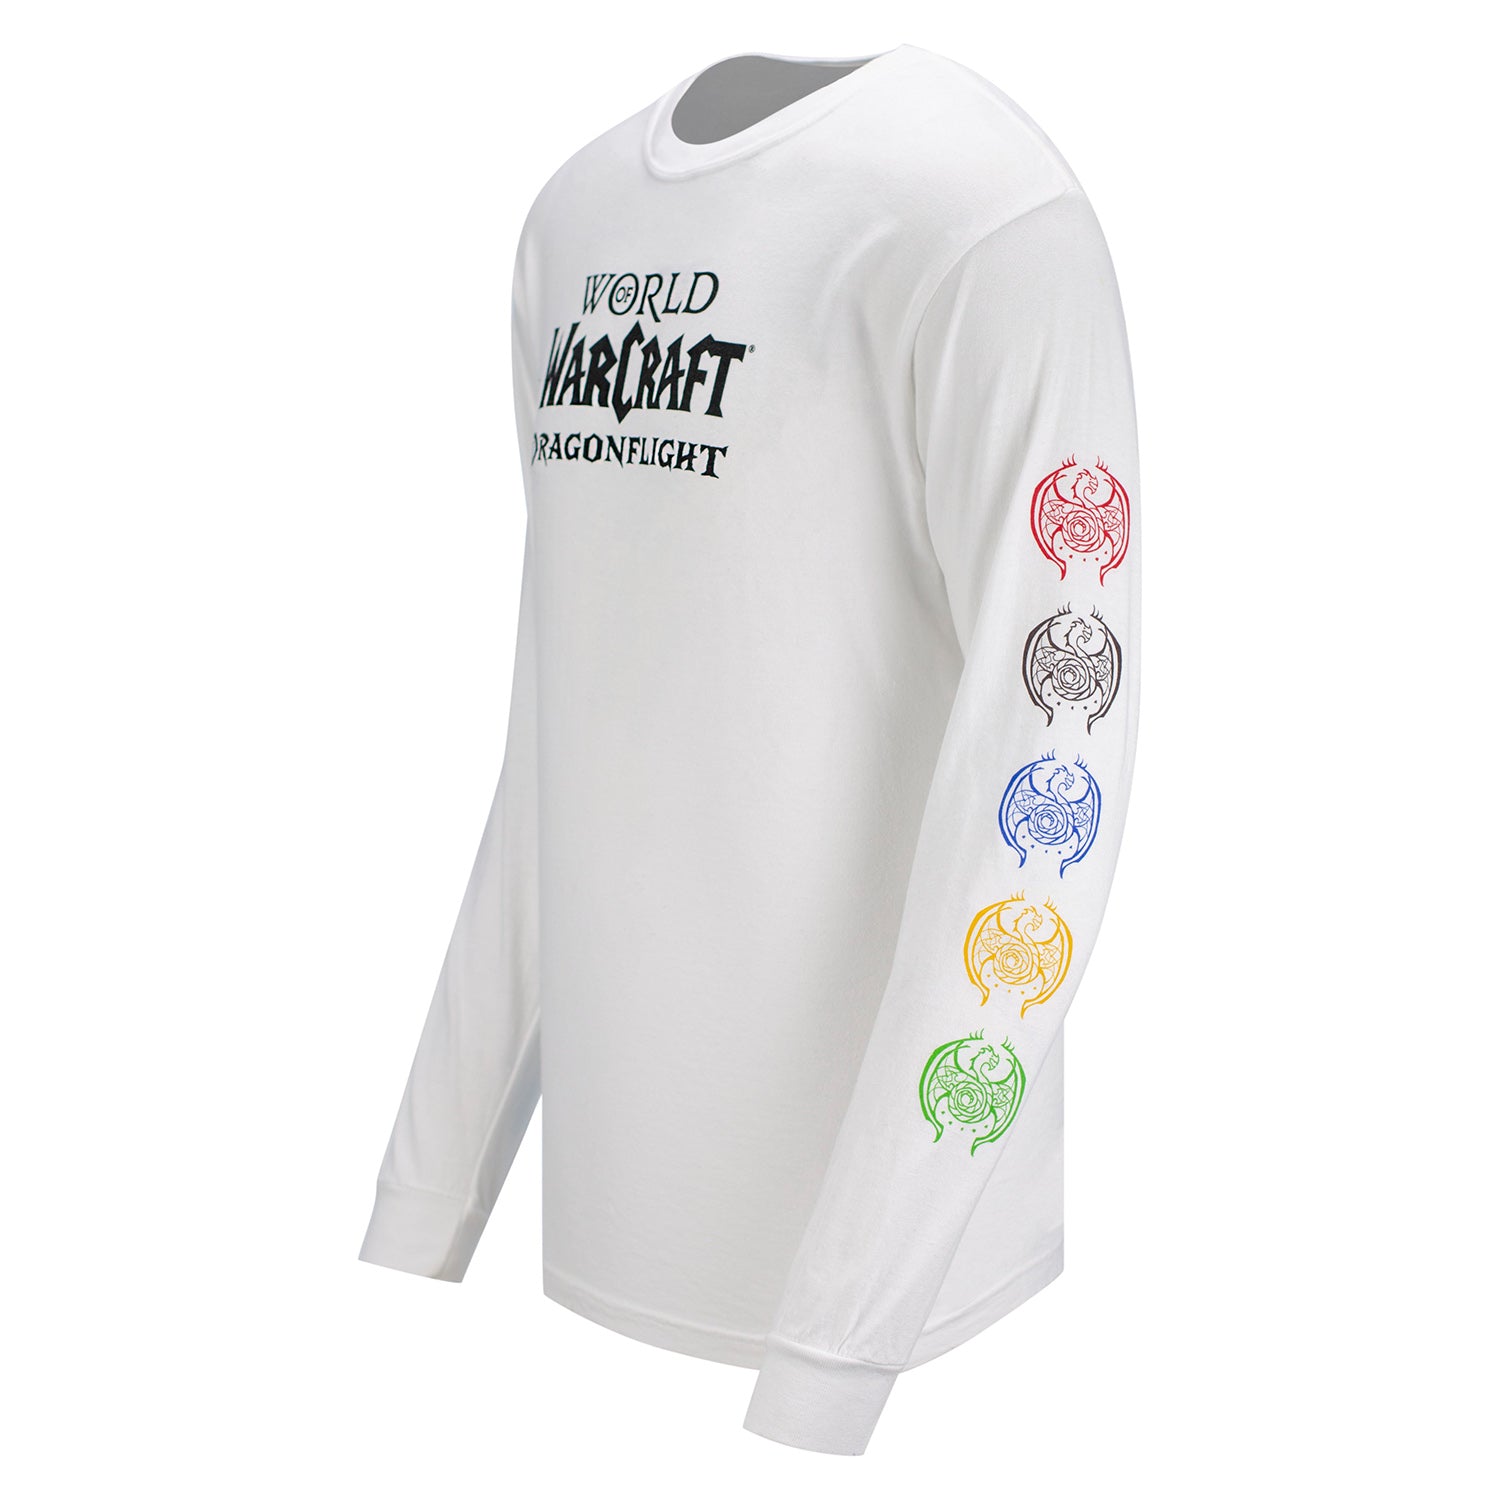 World of Warcraft Dragonflight White Long Sleeve T-Shirt - Front Side View with Multi-Color Dragonflight Logos